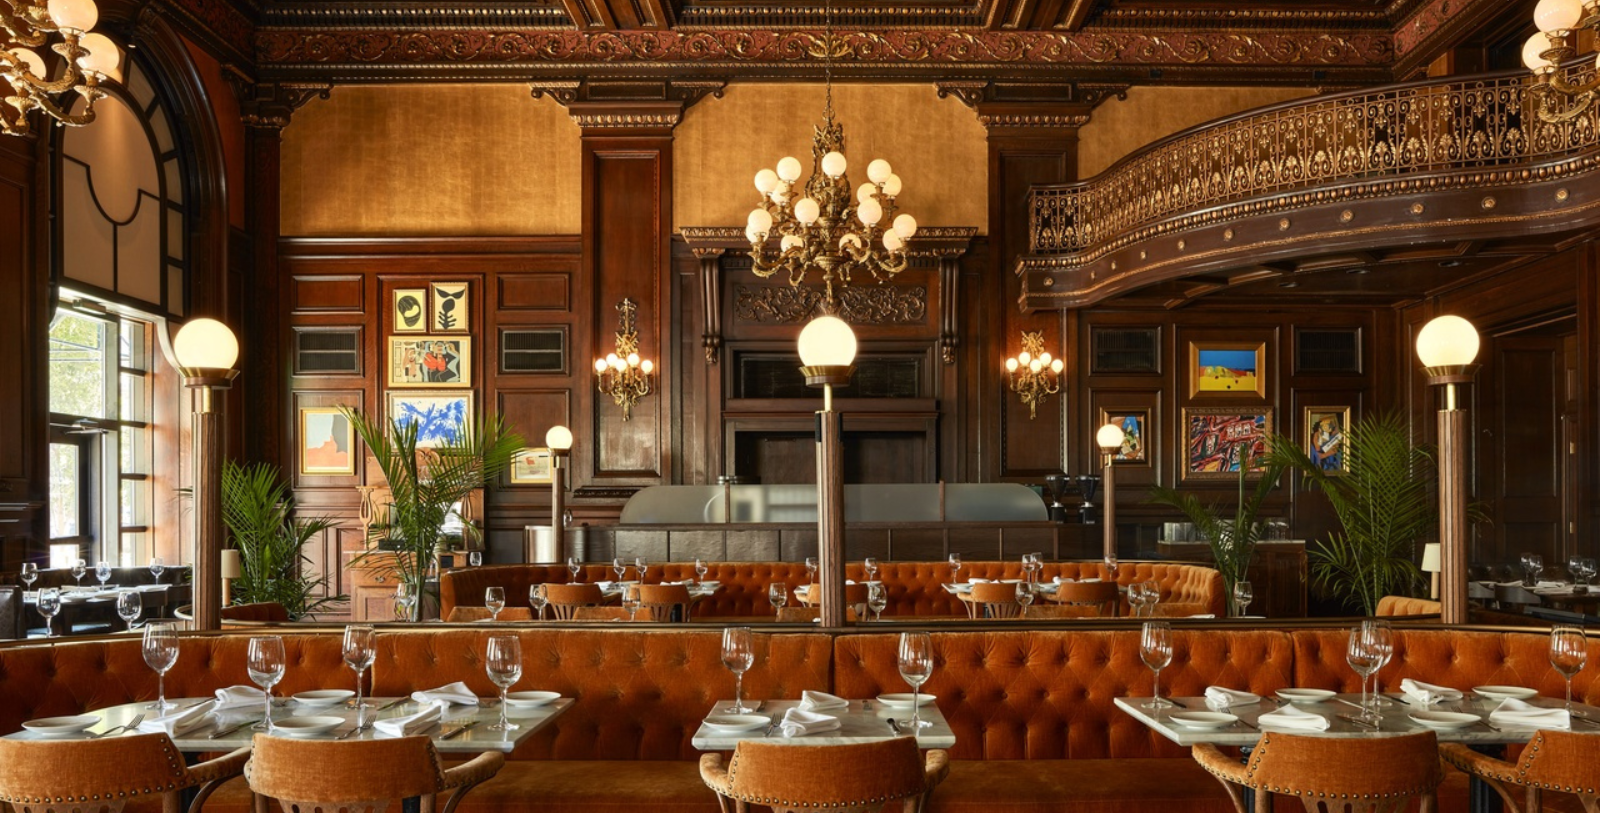 Taste the vibrant flavors of North Africa and Provençe at the hotel's restaurant, Le Cavalier.